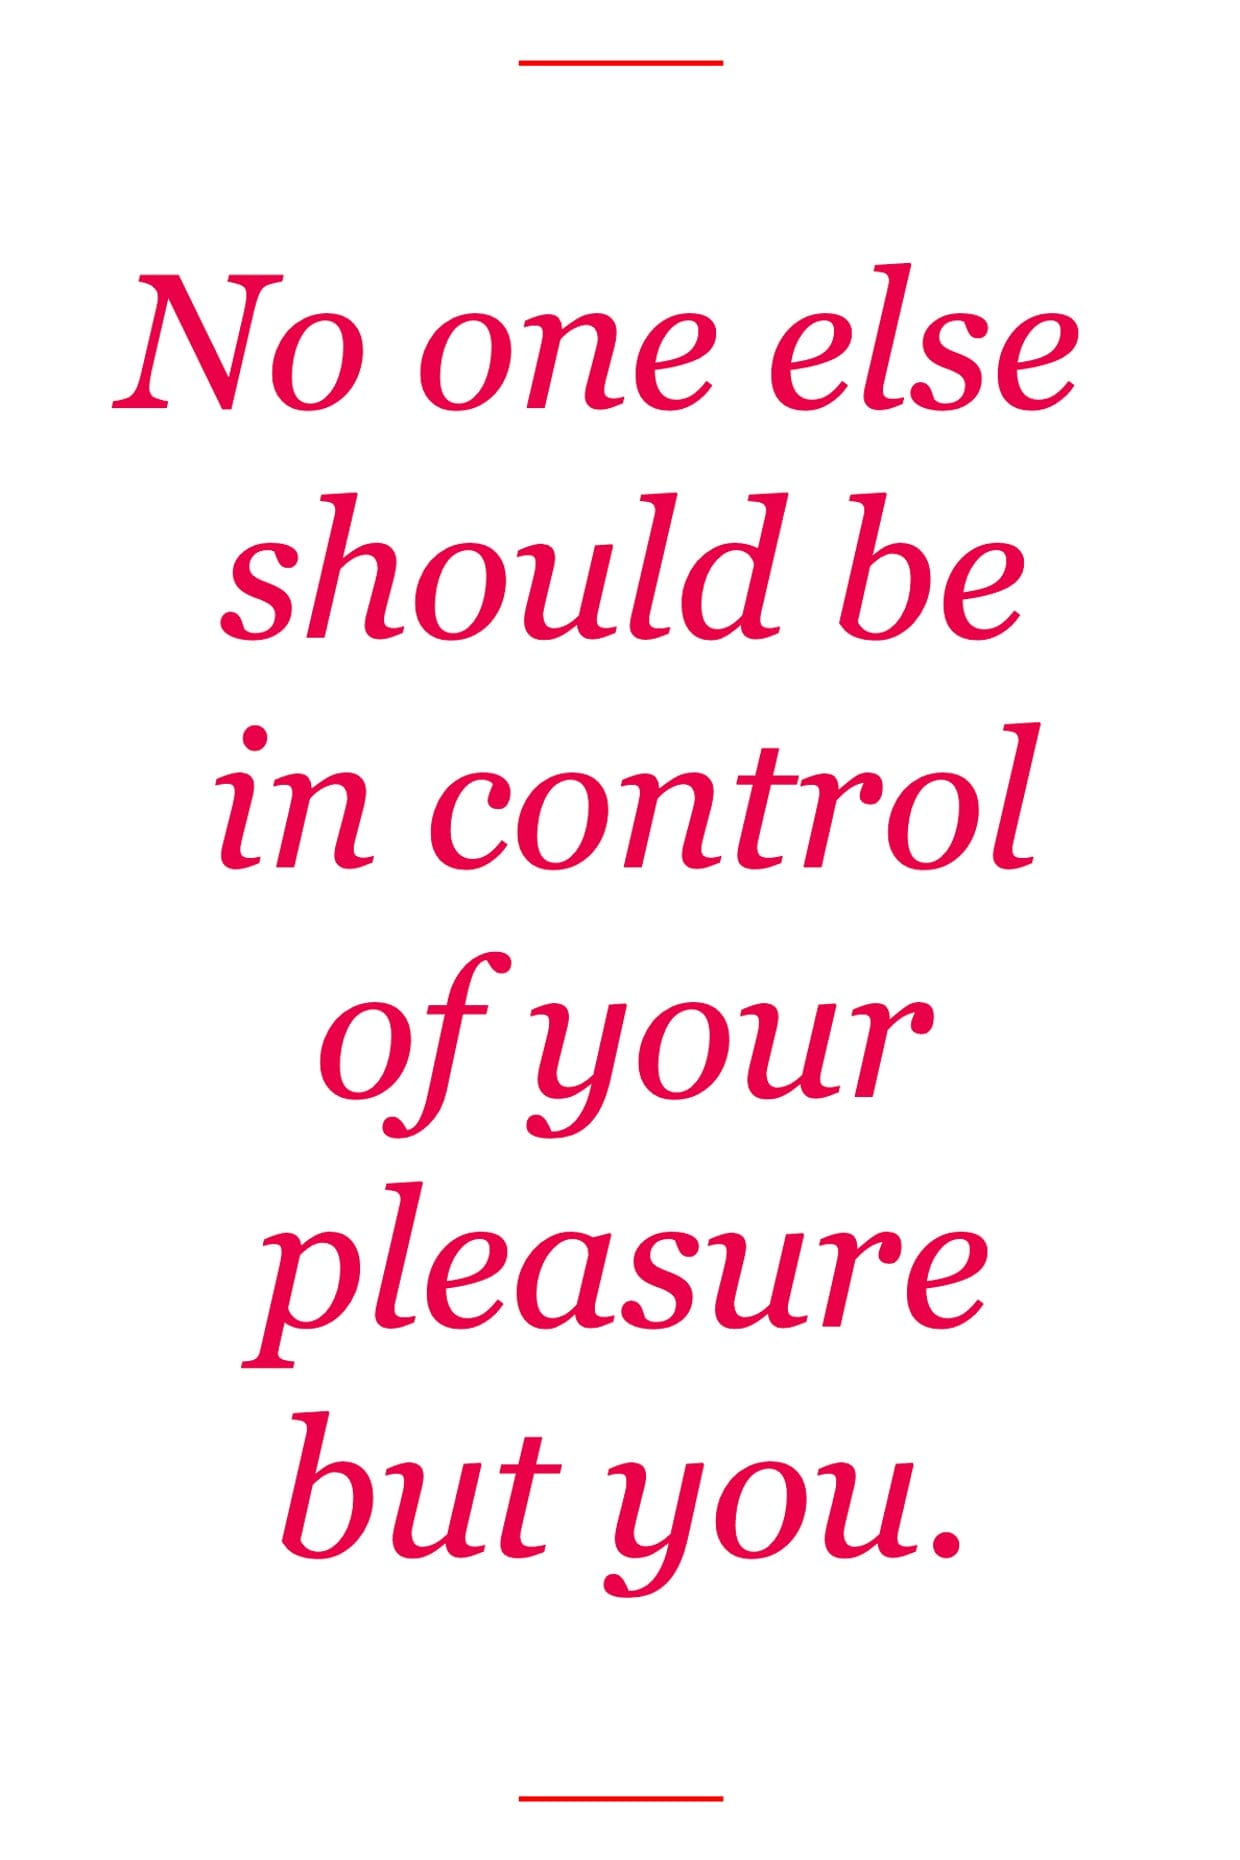 No one else should be in control of your pleasure but you.